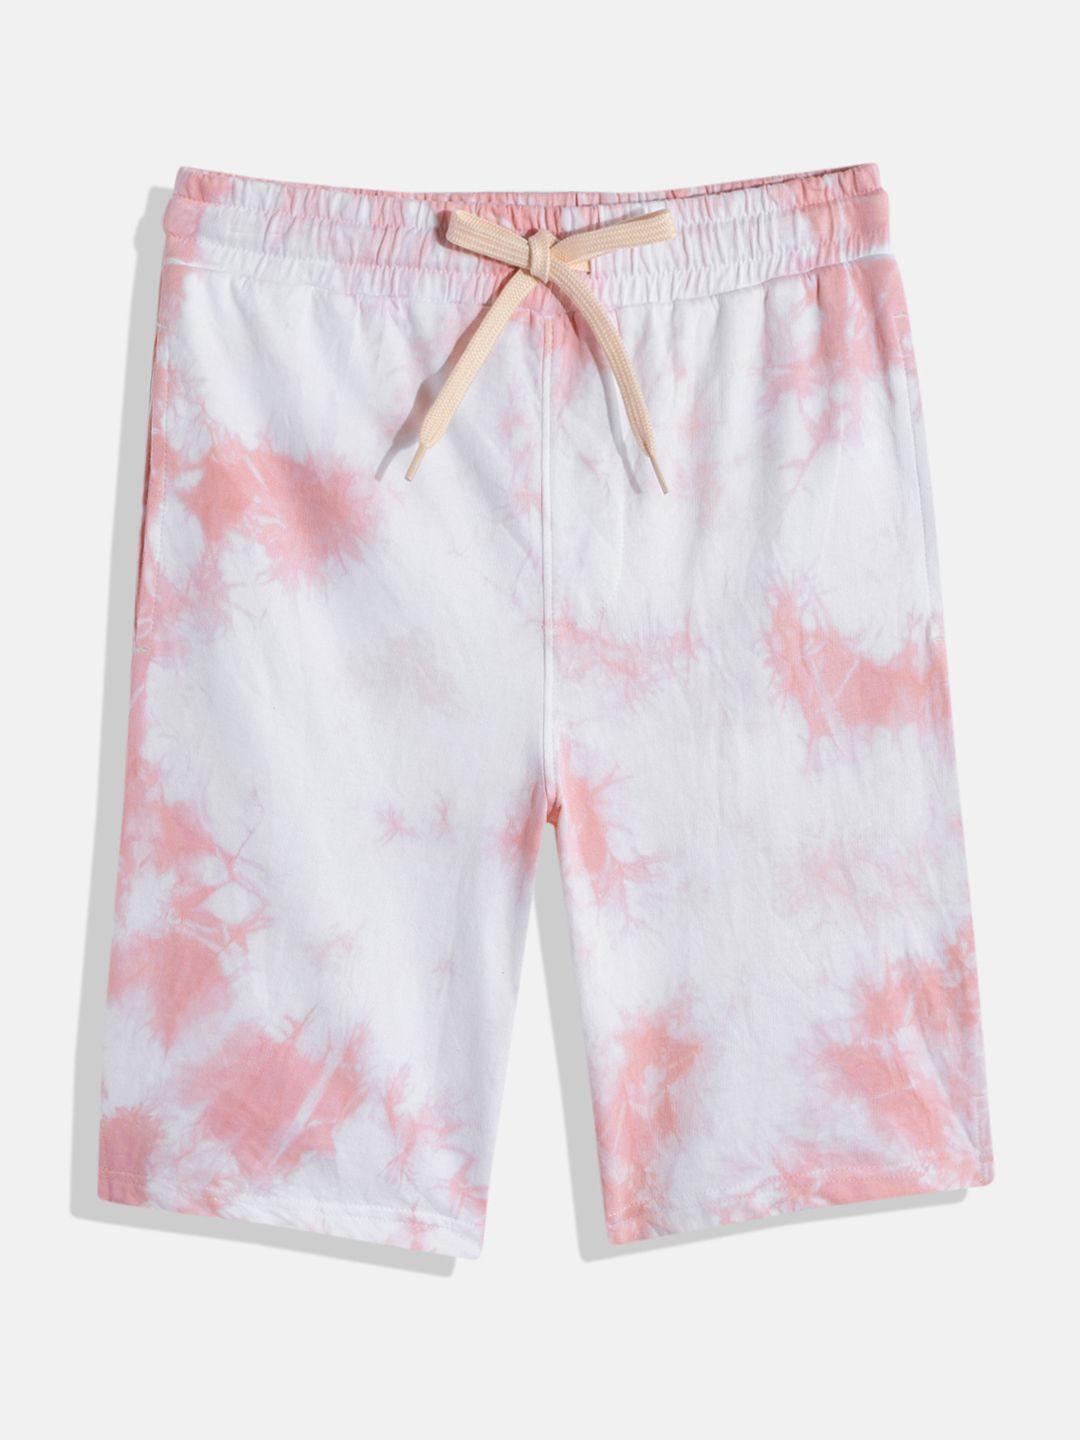 m&h-juniors-boys-white-and-pink-abstract-printed-pure-cotton-shorts